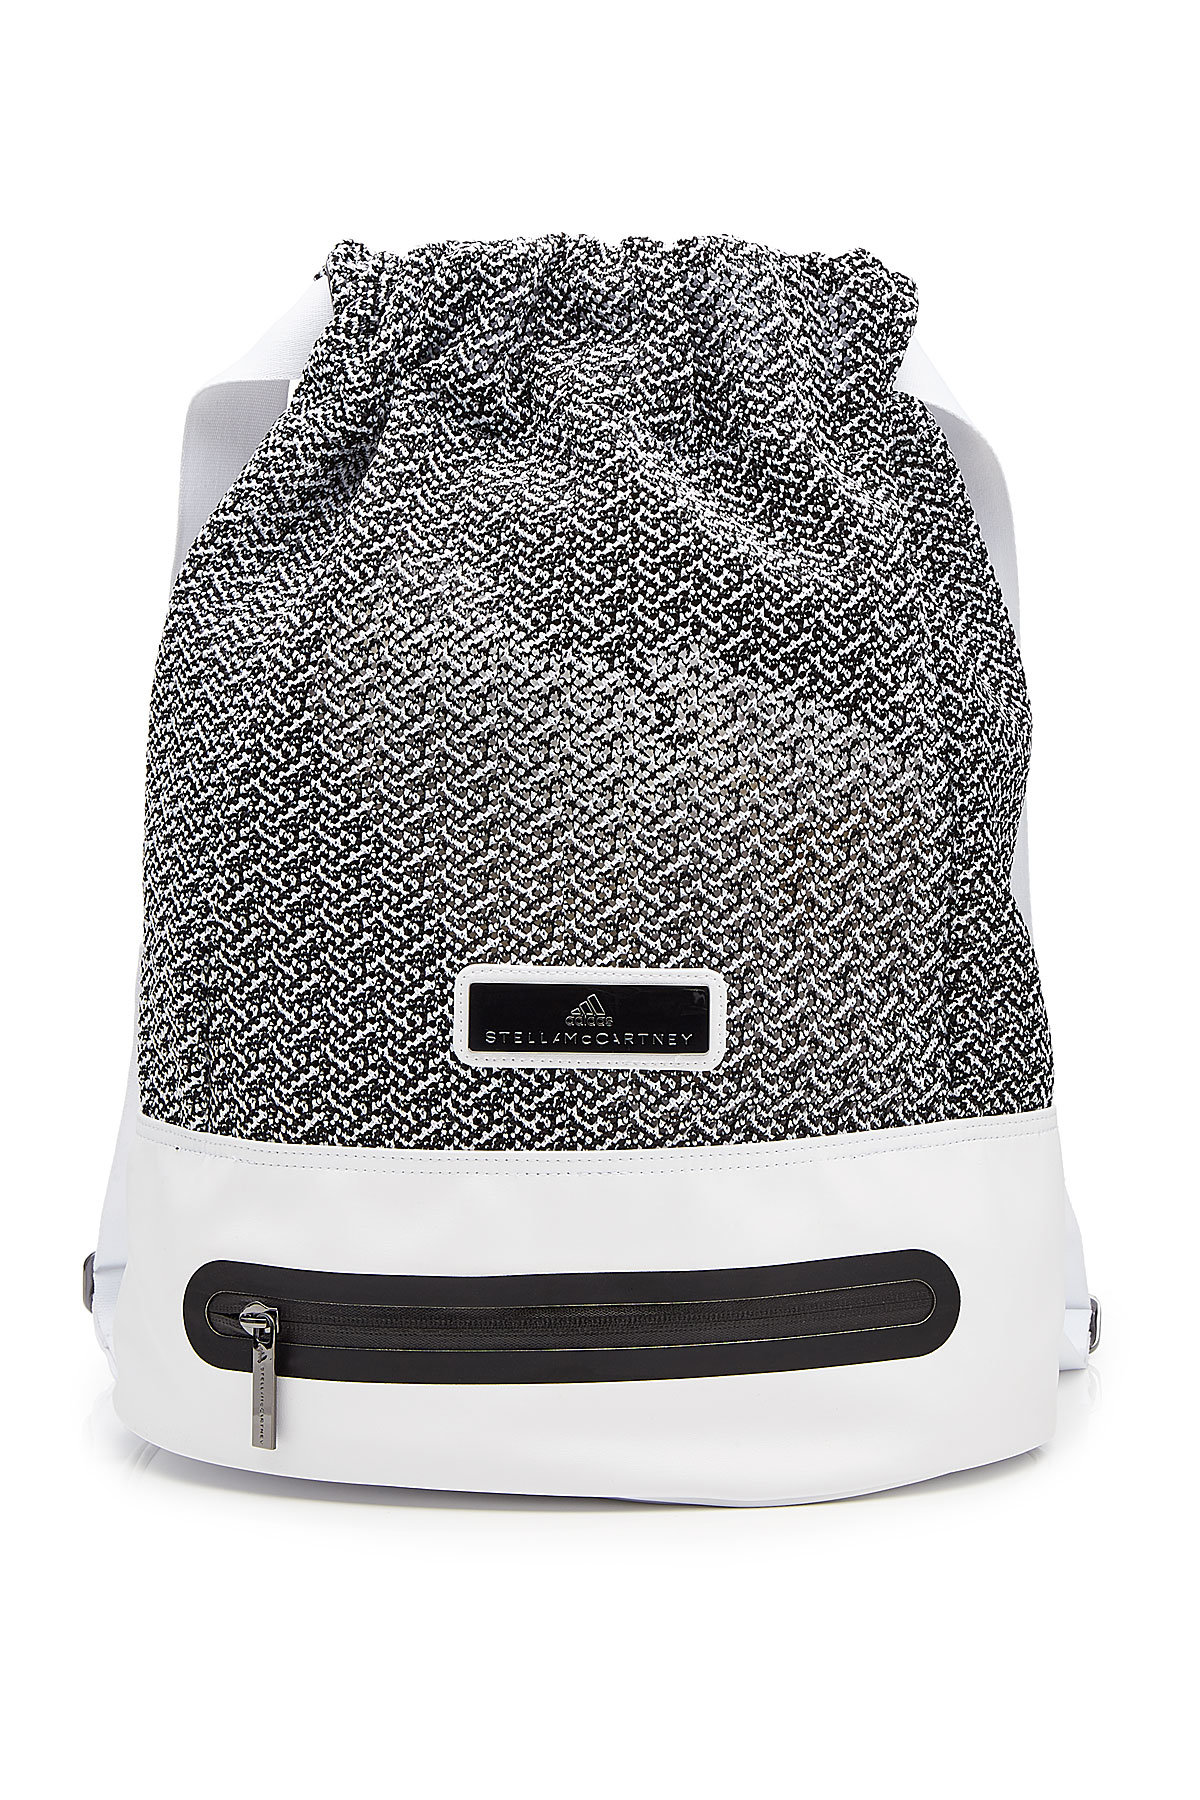 Knit Backpack by adidas by Stella McCartney